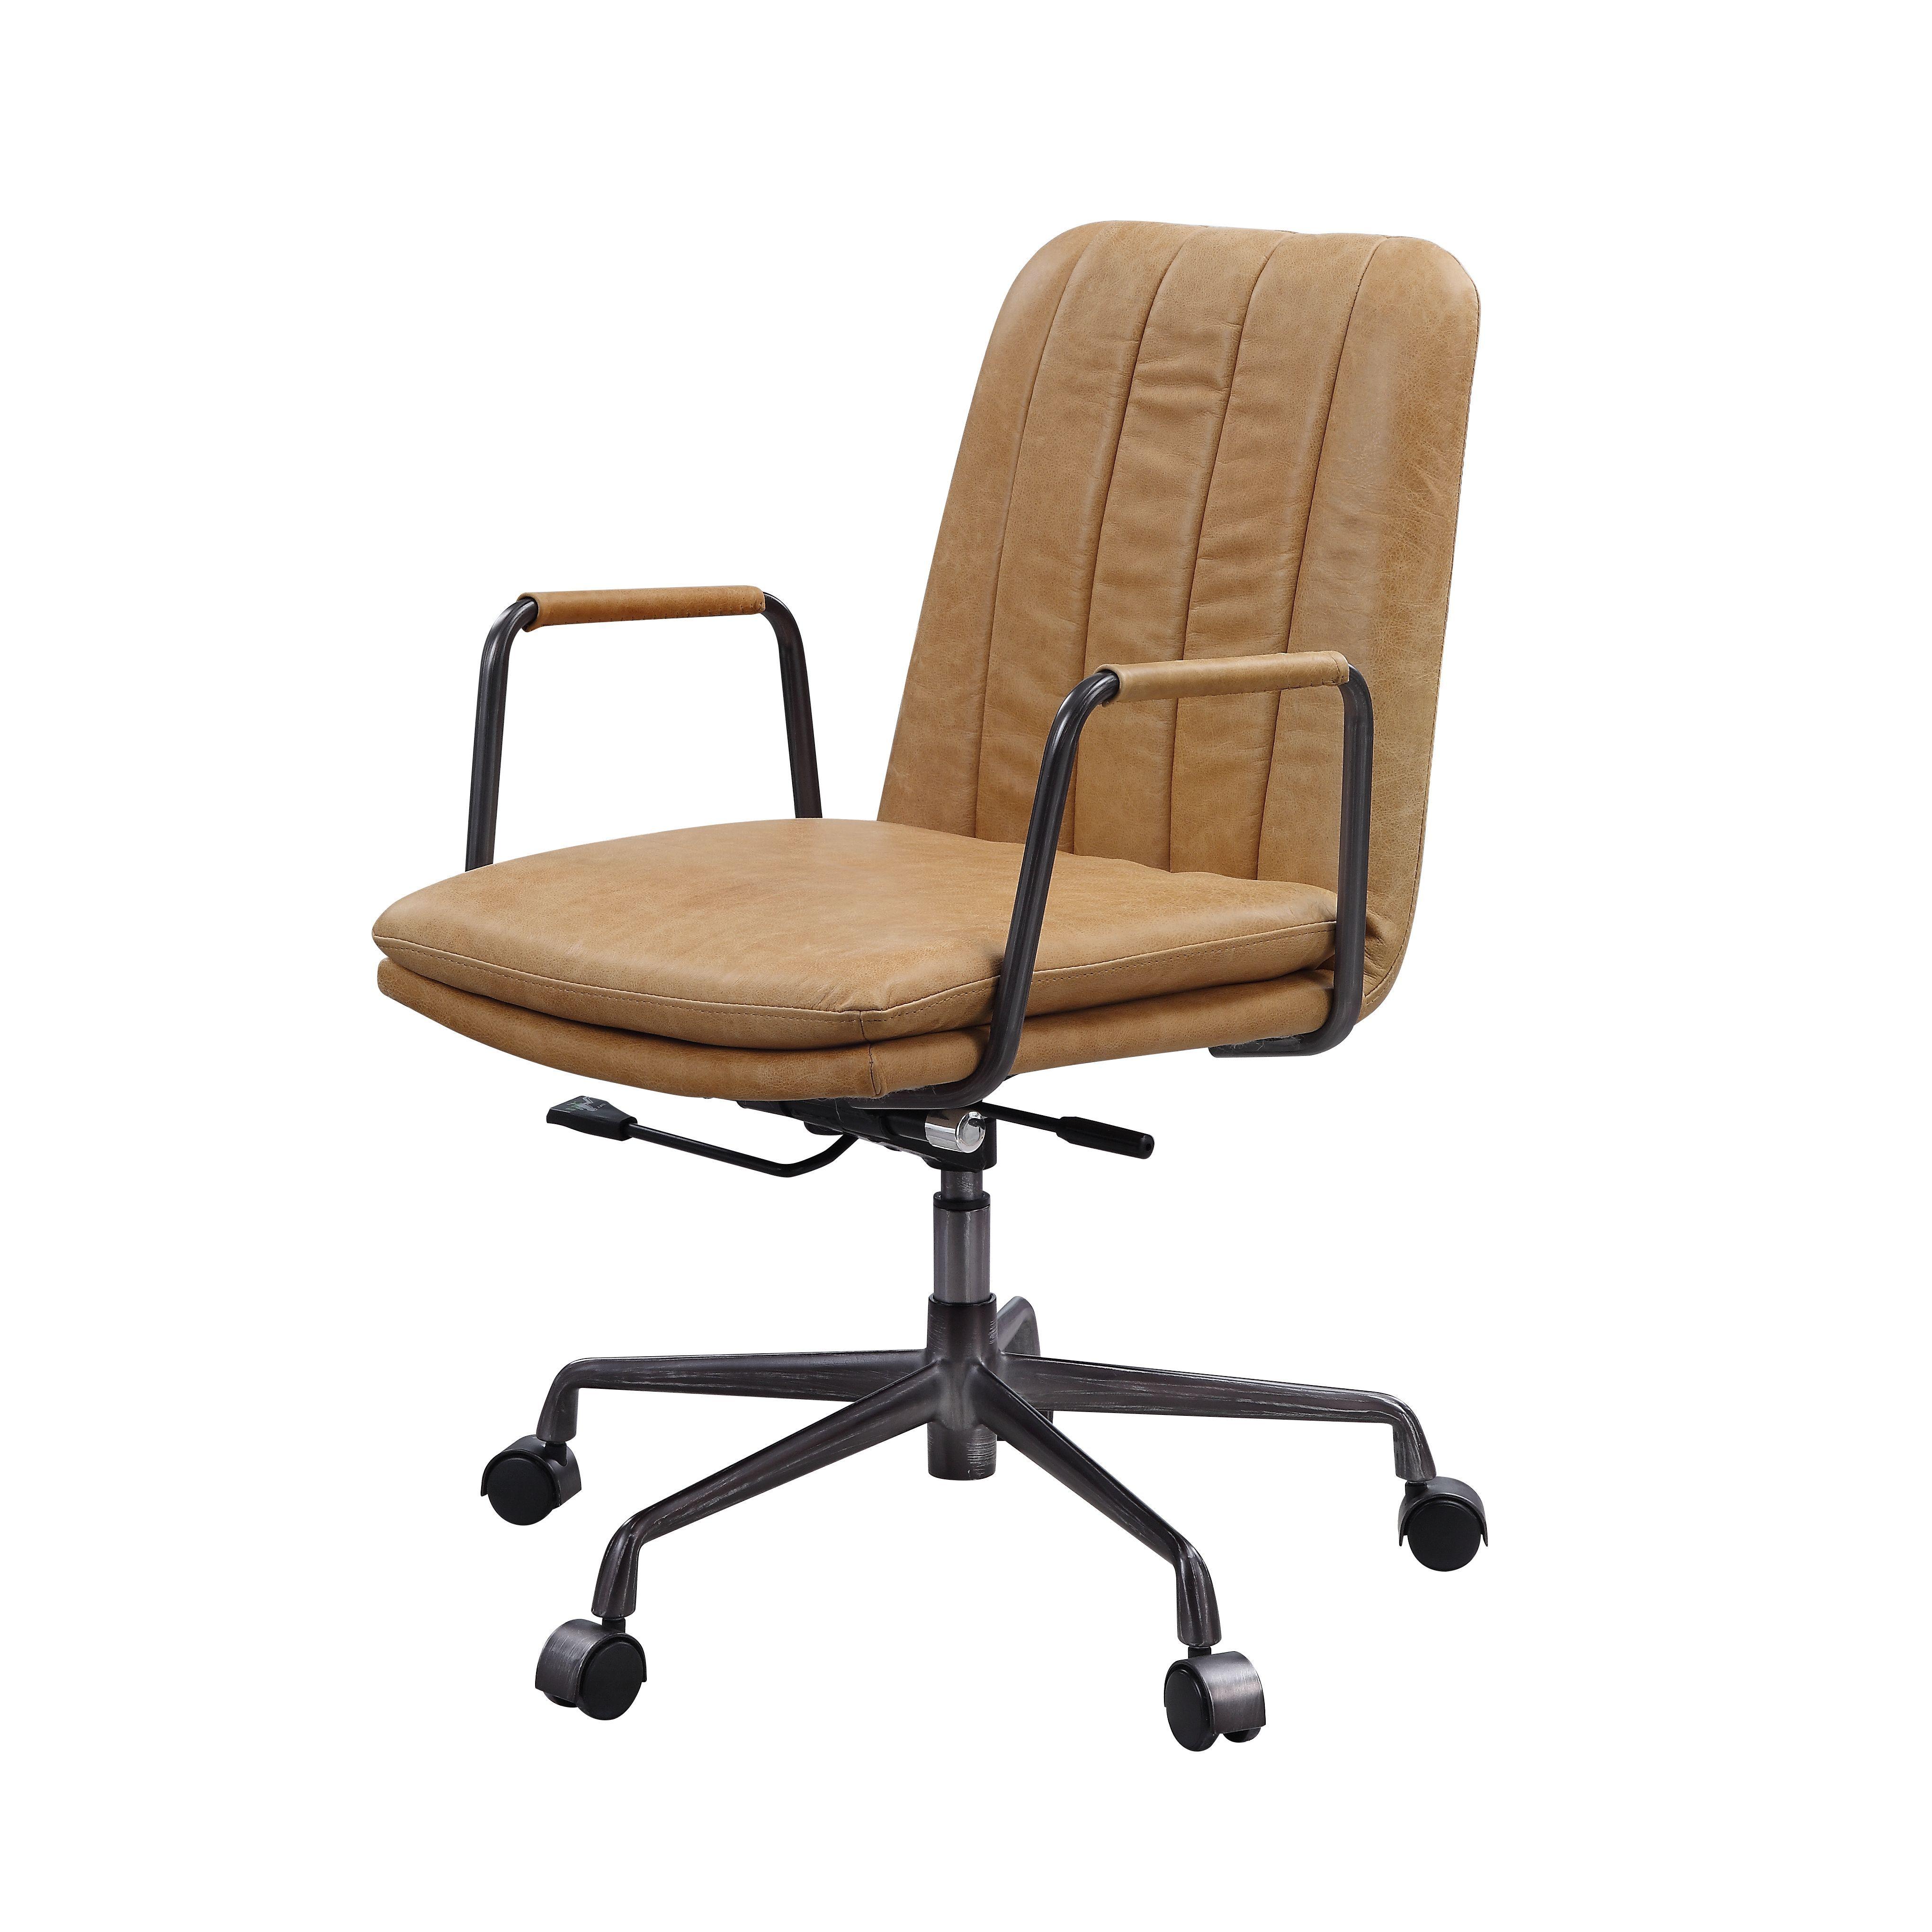 Modern Office Chair Eclarn 93174 in Brown Top grain leather